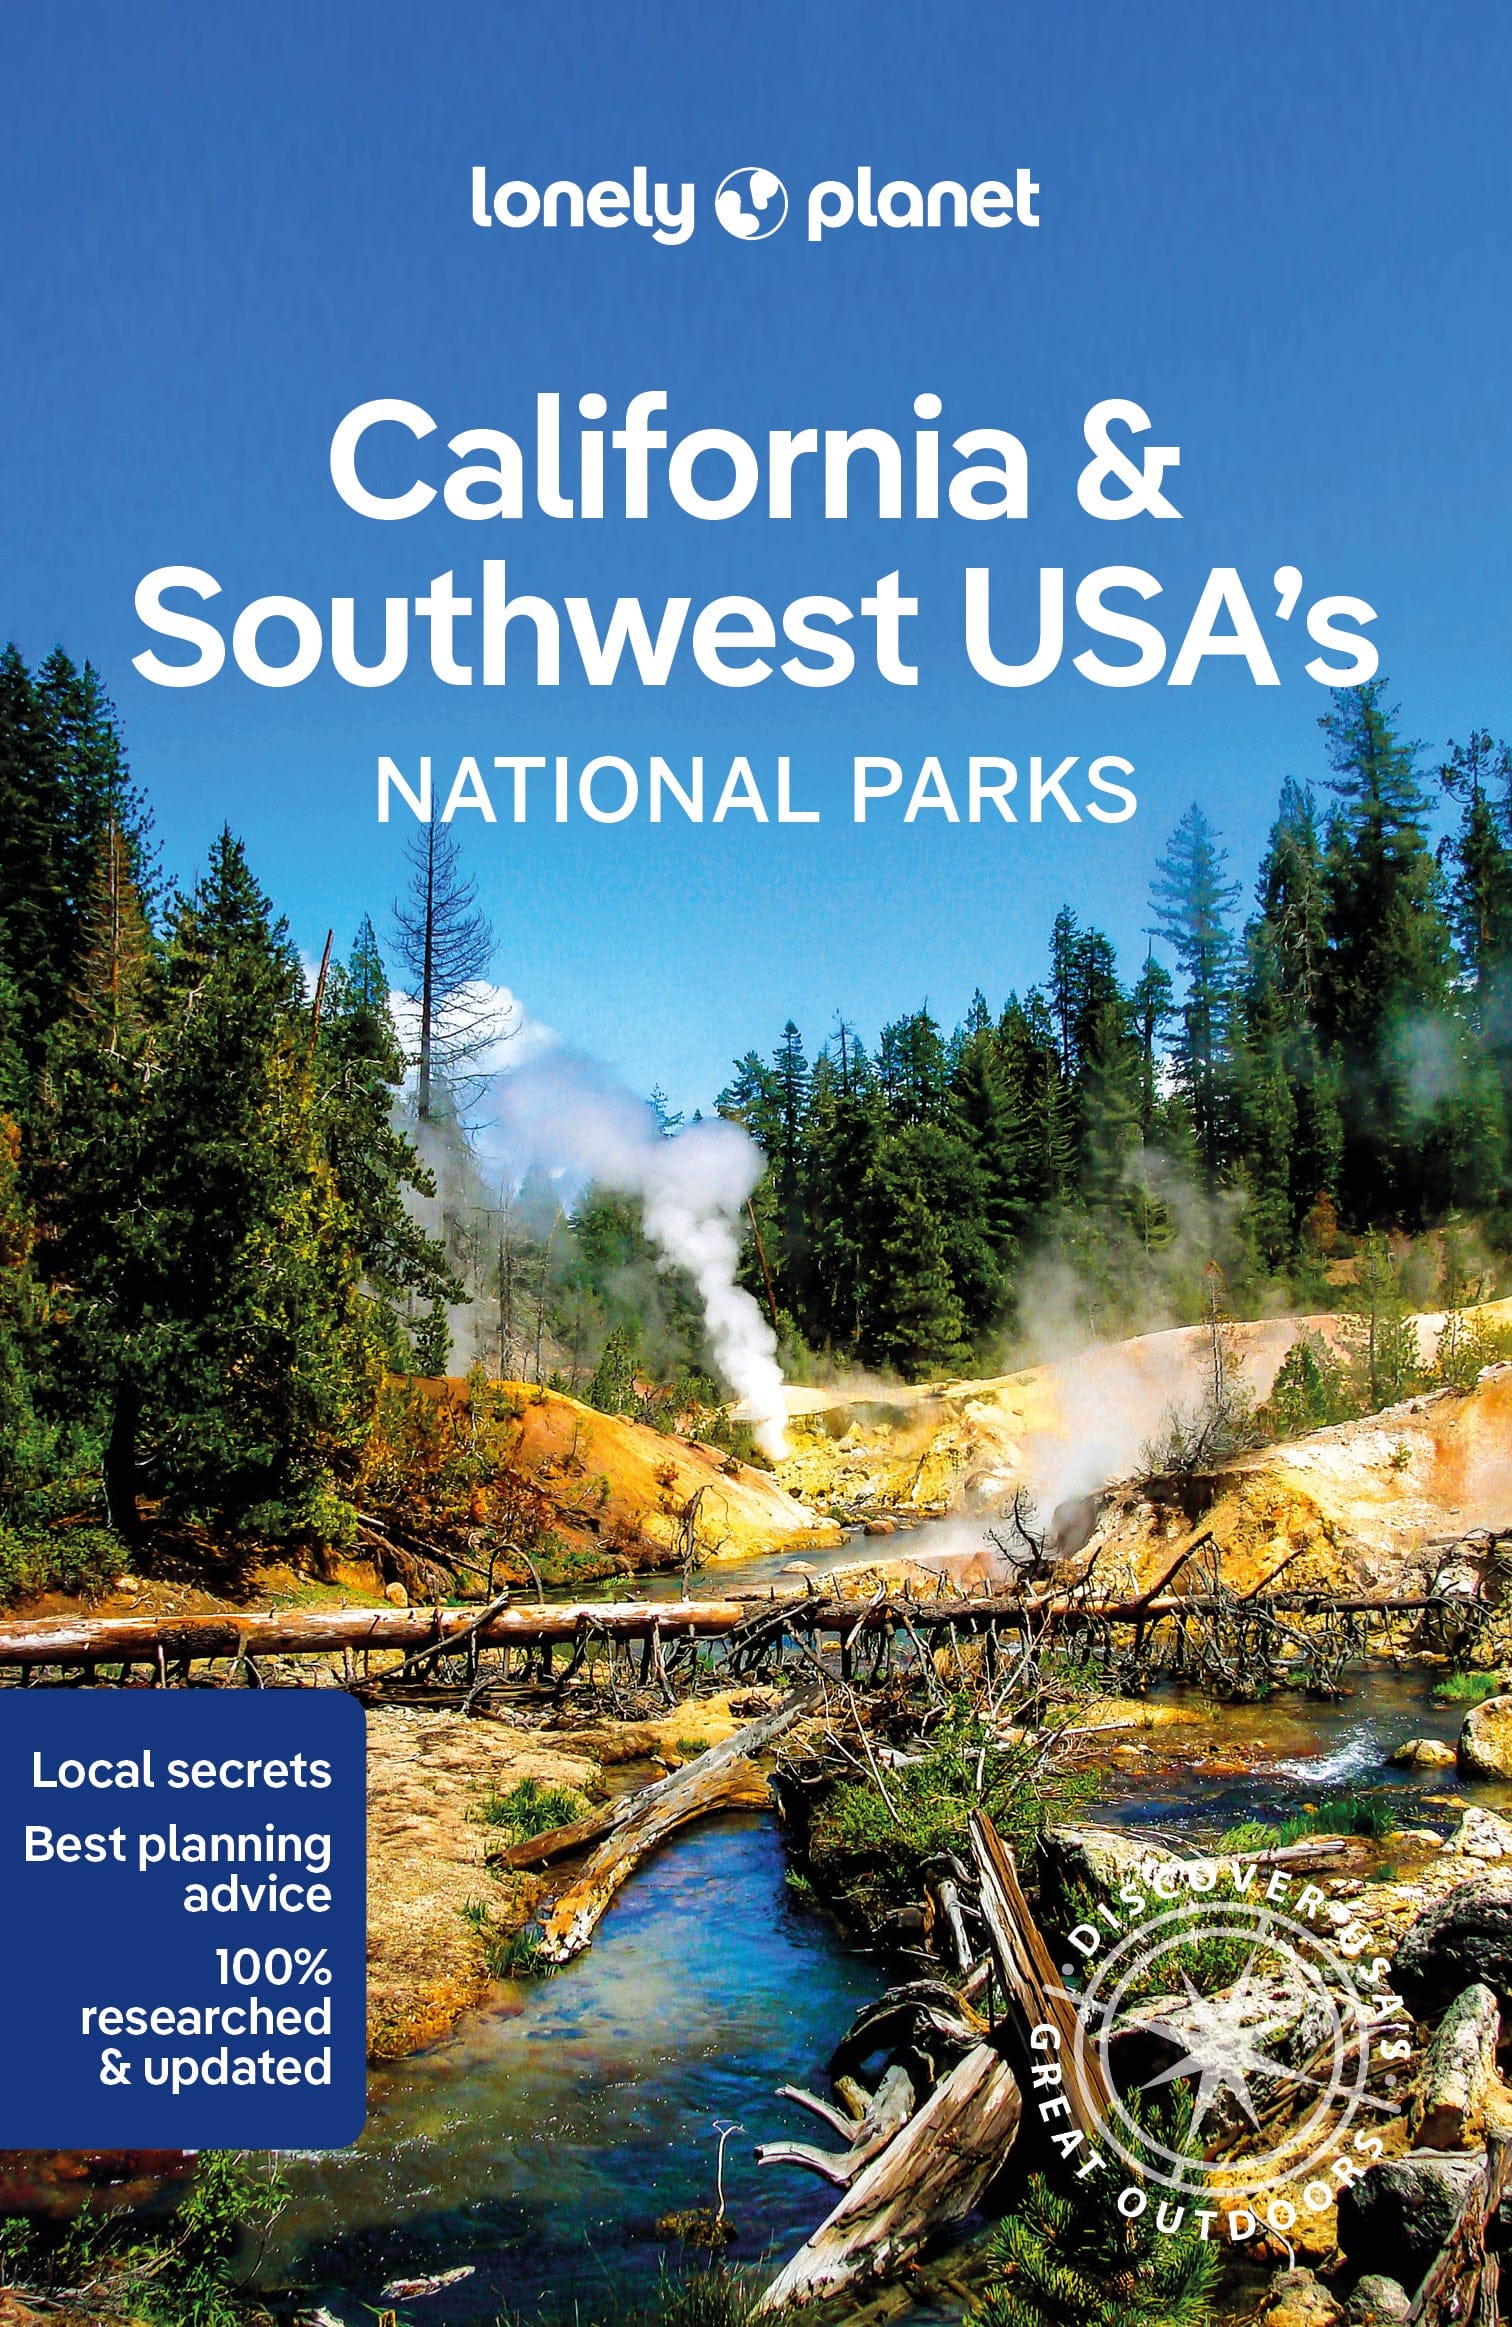 california-southwest-usa-national-parks-guide-lonely-planet